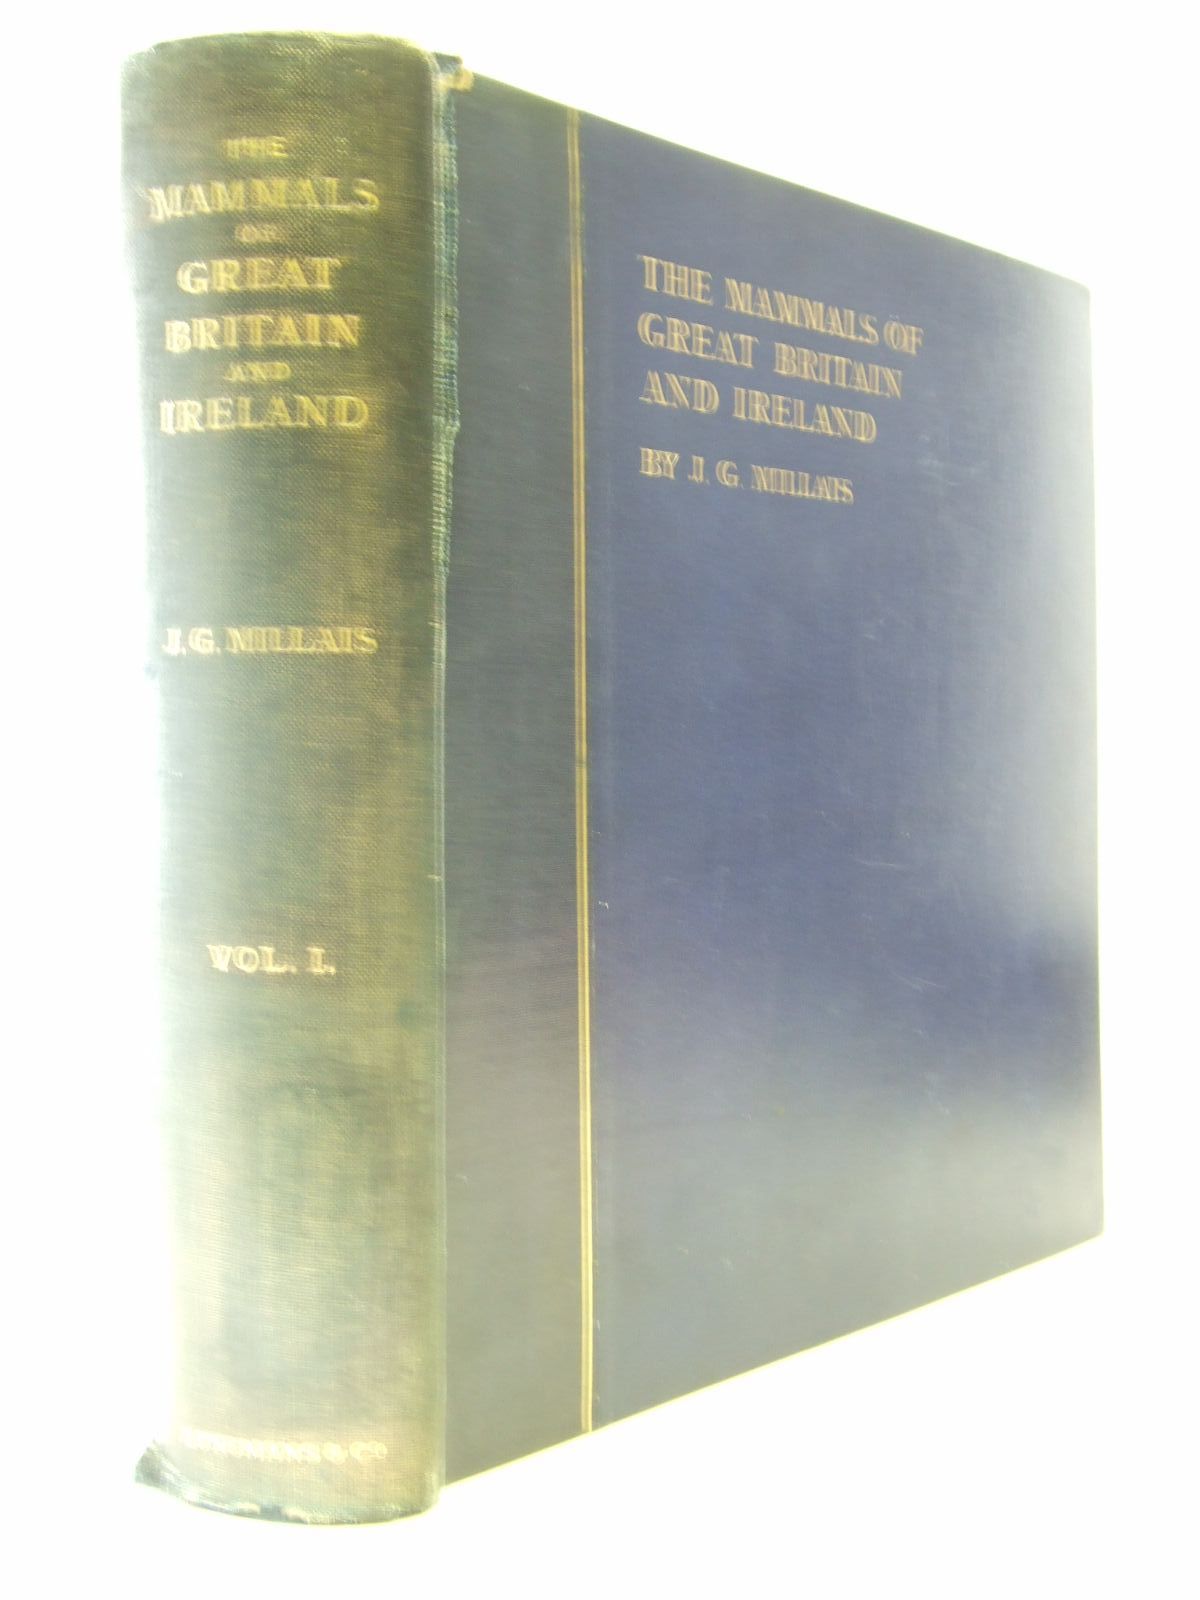 Photo of THE MAMMALS OF GREAT BRITAIN AND IRELAND written by Millais, J.G. illustrated by Millais, J.G.
Thorburn, Archibald
Lodge, G.E.
Gronvold, Henrik published by Longmans, Green & Co. (STOCK CODE: 1706435)  for sale by Stella & Rose's Books